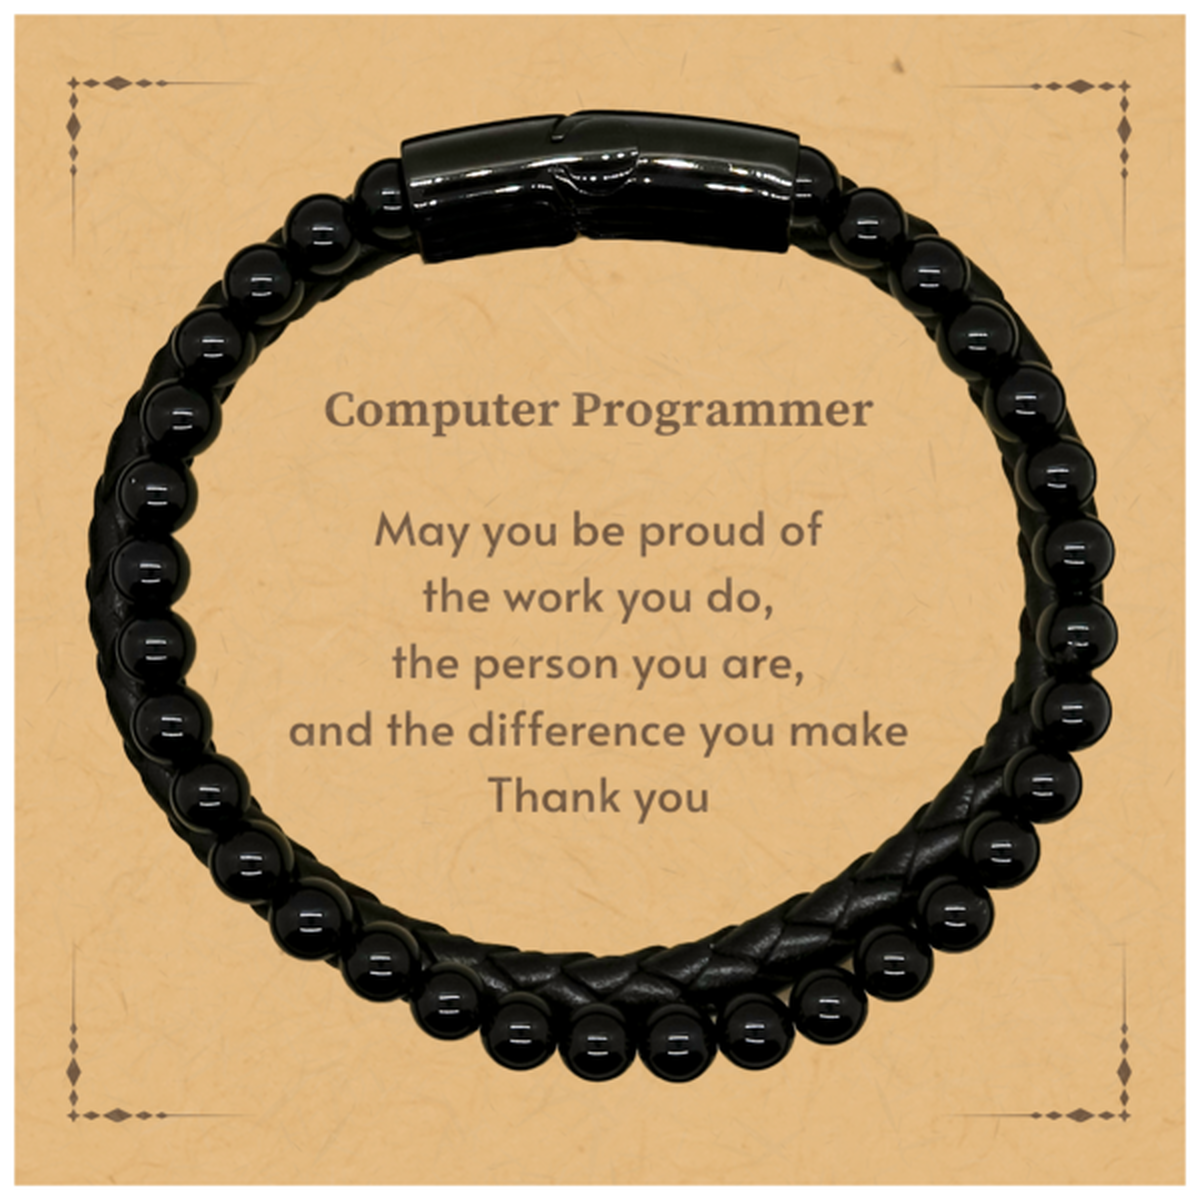 Heartwarming Stone Leather Bracelets Retirement Coworkers Gifts for Computer Programmer, Computer Programmer May You be proud of the work you do, the person you are Gifts for Boss Men Women Friends